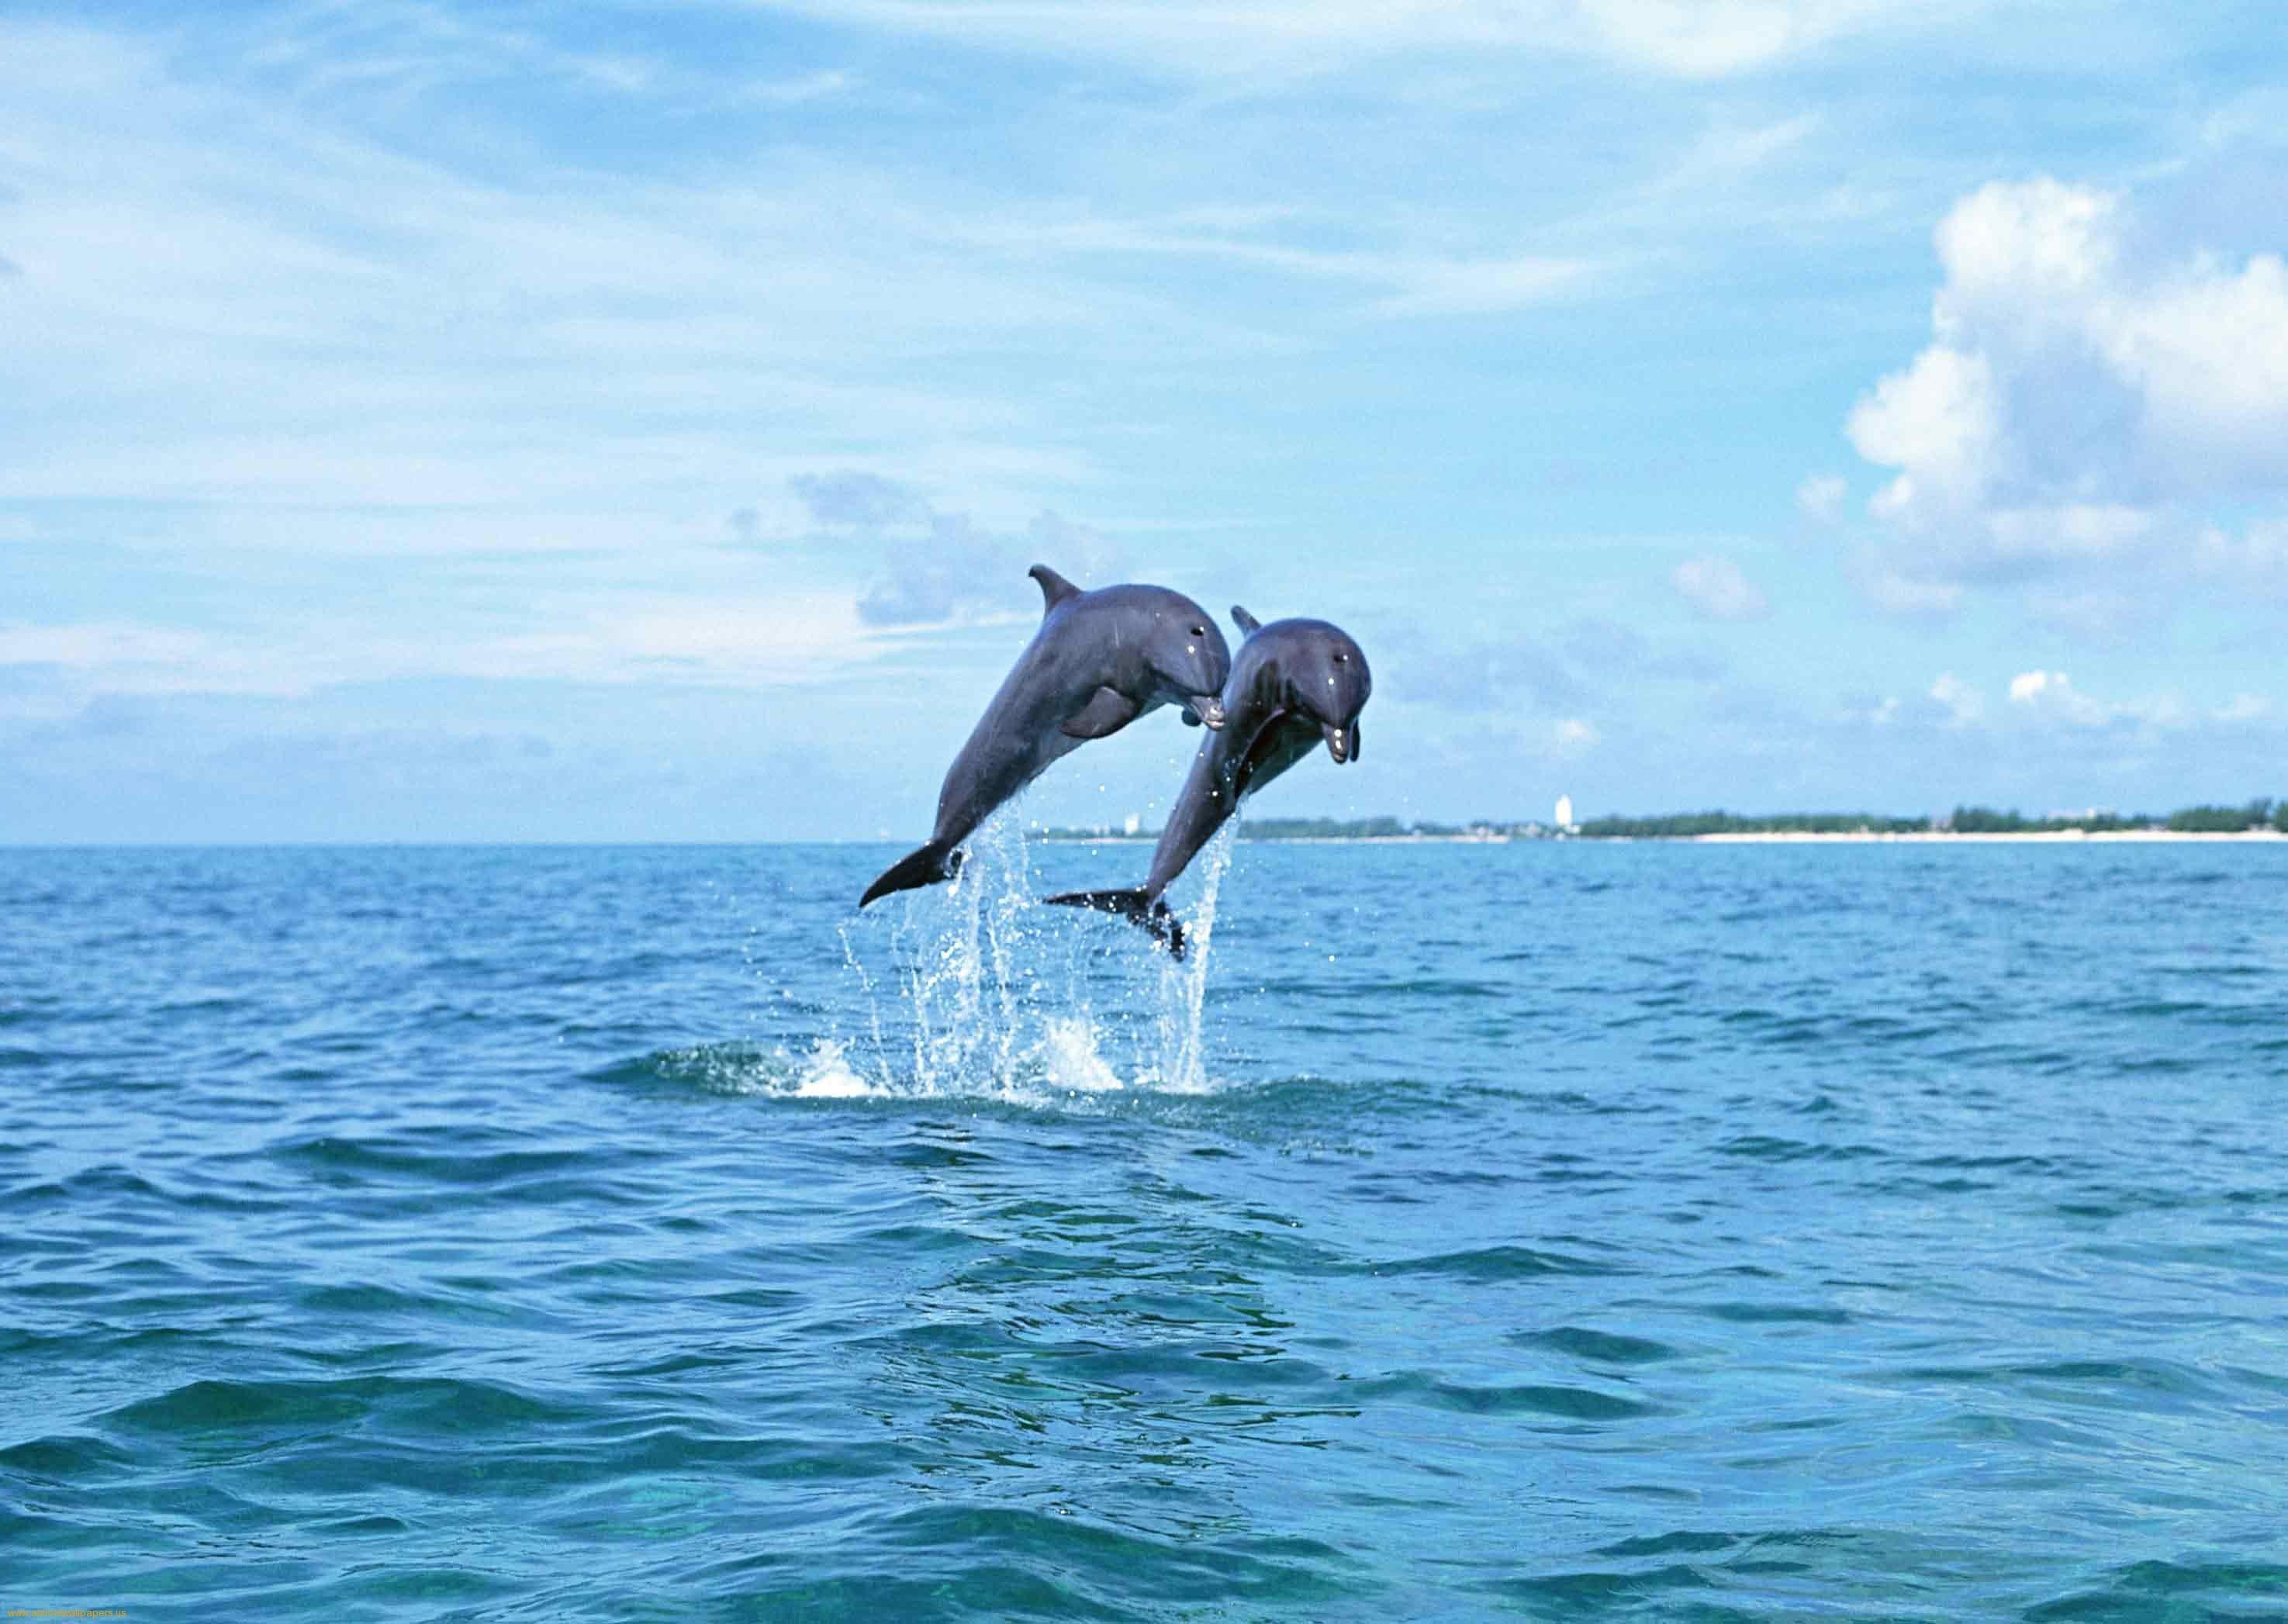 Dolphins Jumping (in 60 FPS Slow Motion) - YouTube